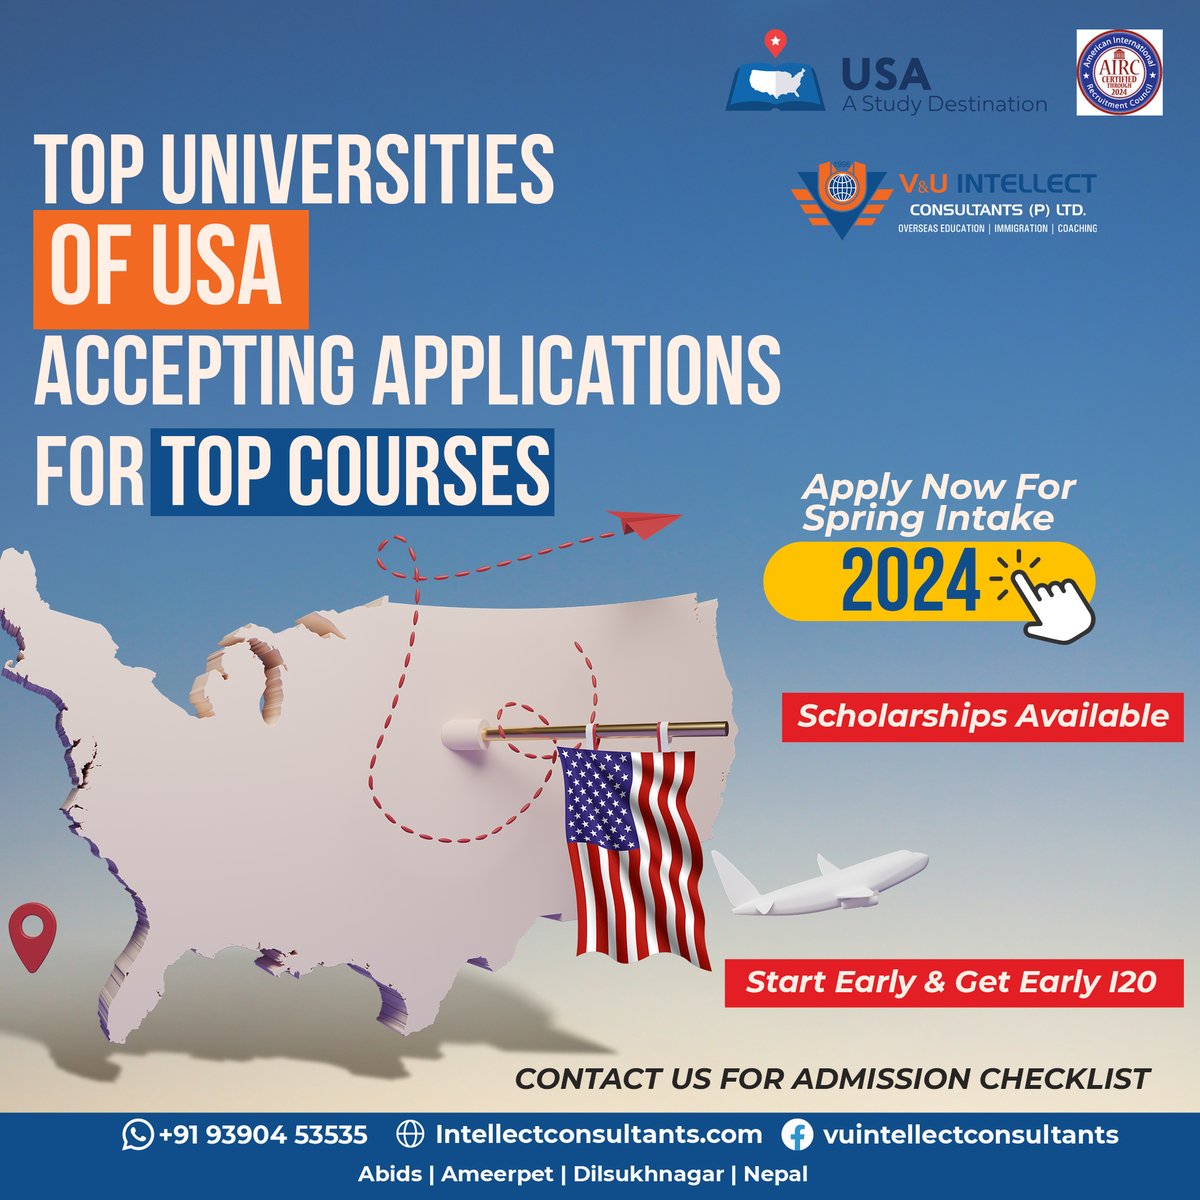 📲Call us at +91 9390 453535 
📩 Email us at info@intellectconsultants.com 
#studyinusa #studyabroad #intake2024 #spring2024 #evaluation #experts #interactivesession #scholarship #UniversitiesinUSA #StudyInAmerica #highereducation #vuintellectconsultantshyd